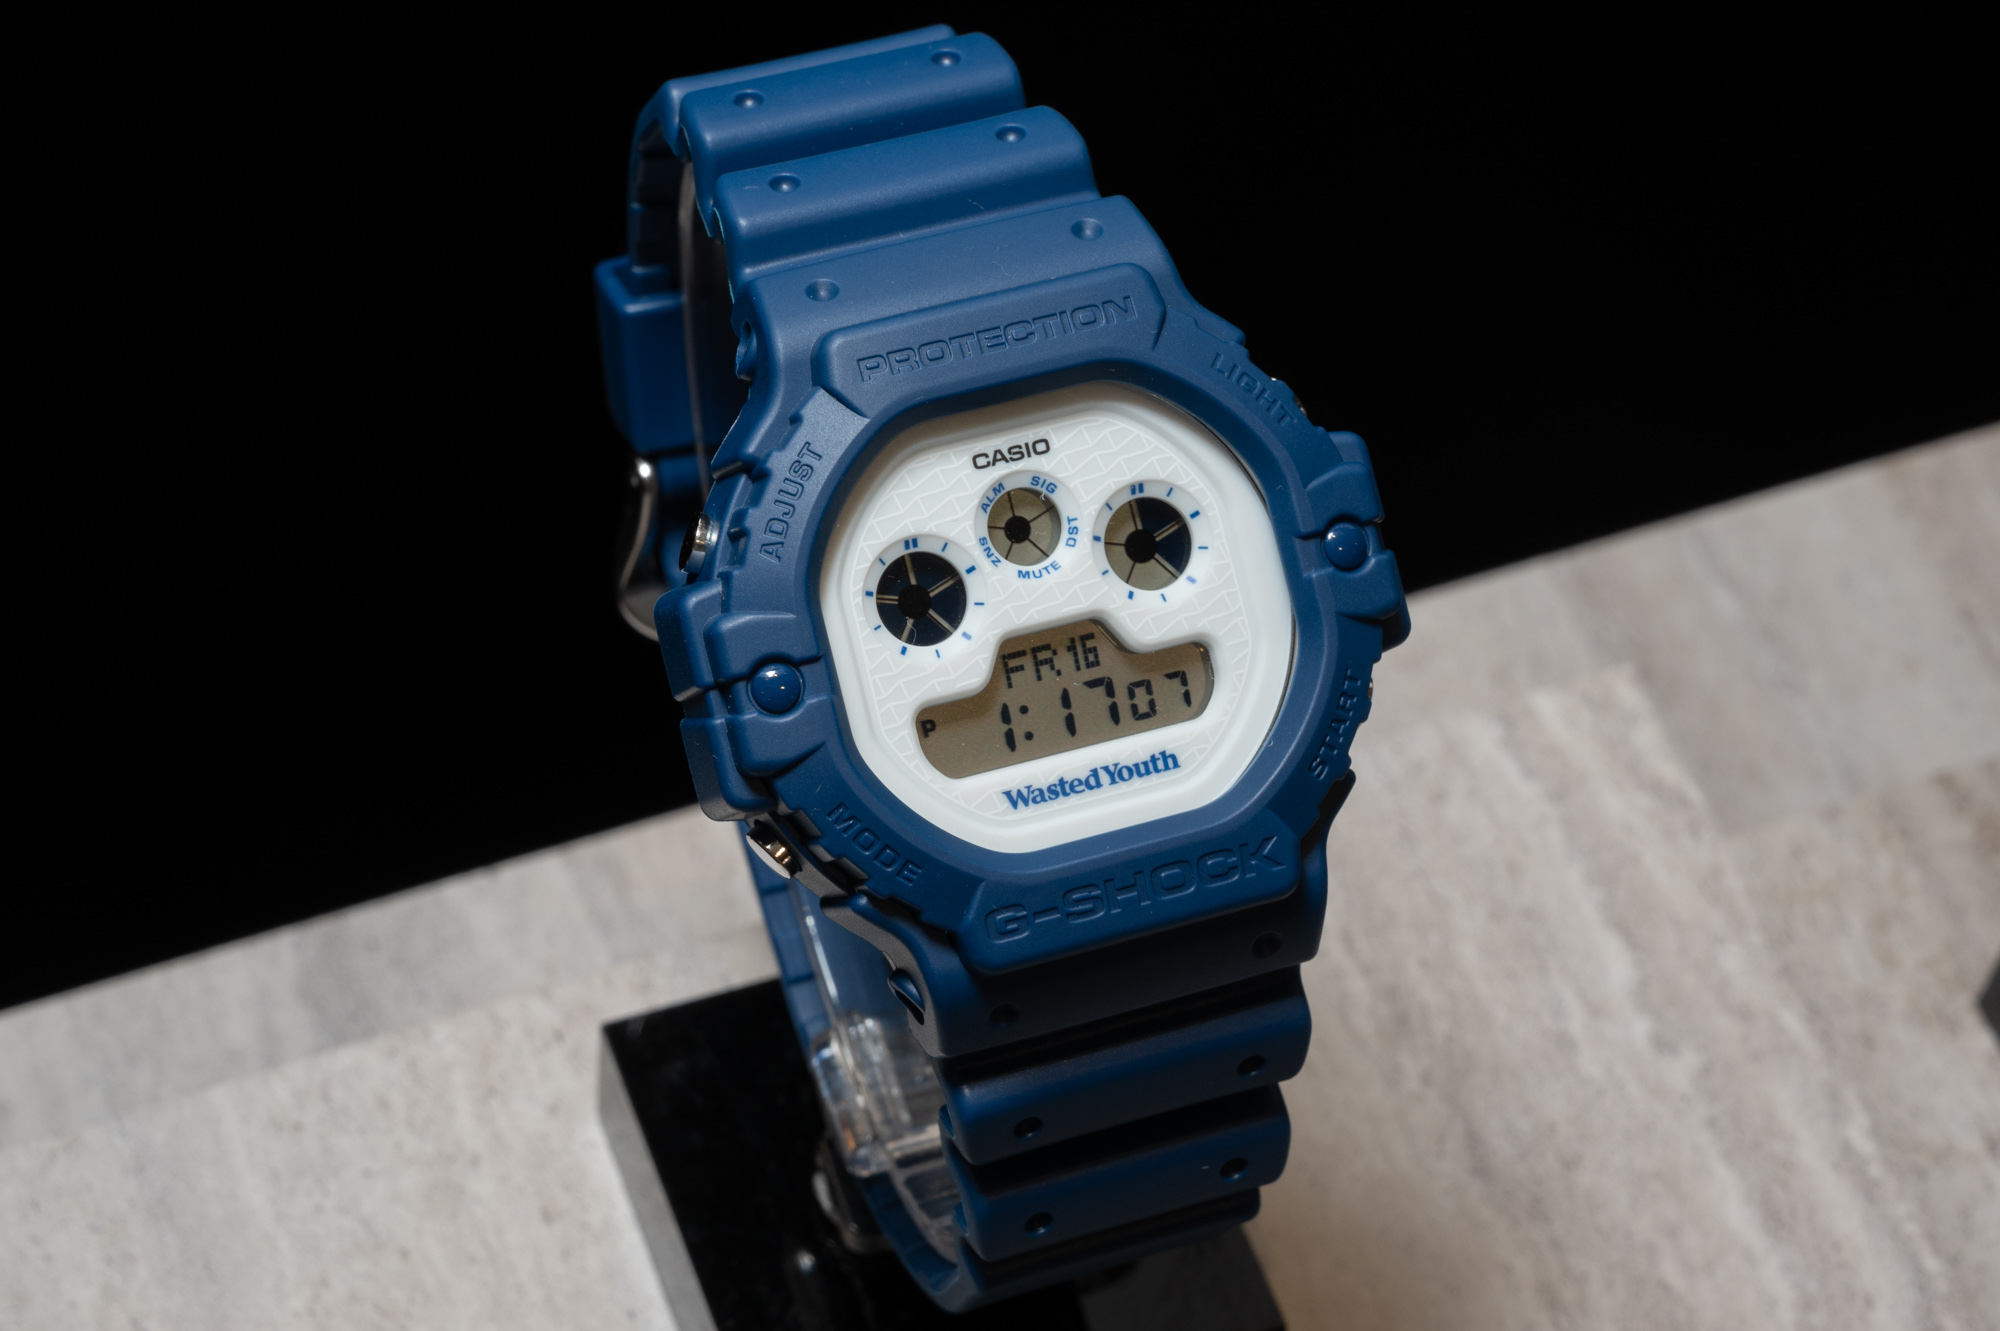 Wasted Youth G-SHOCK